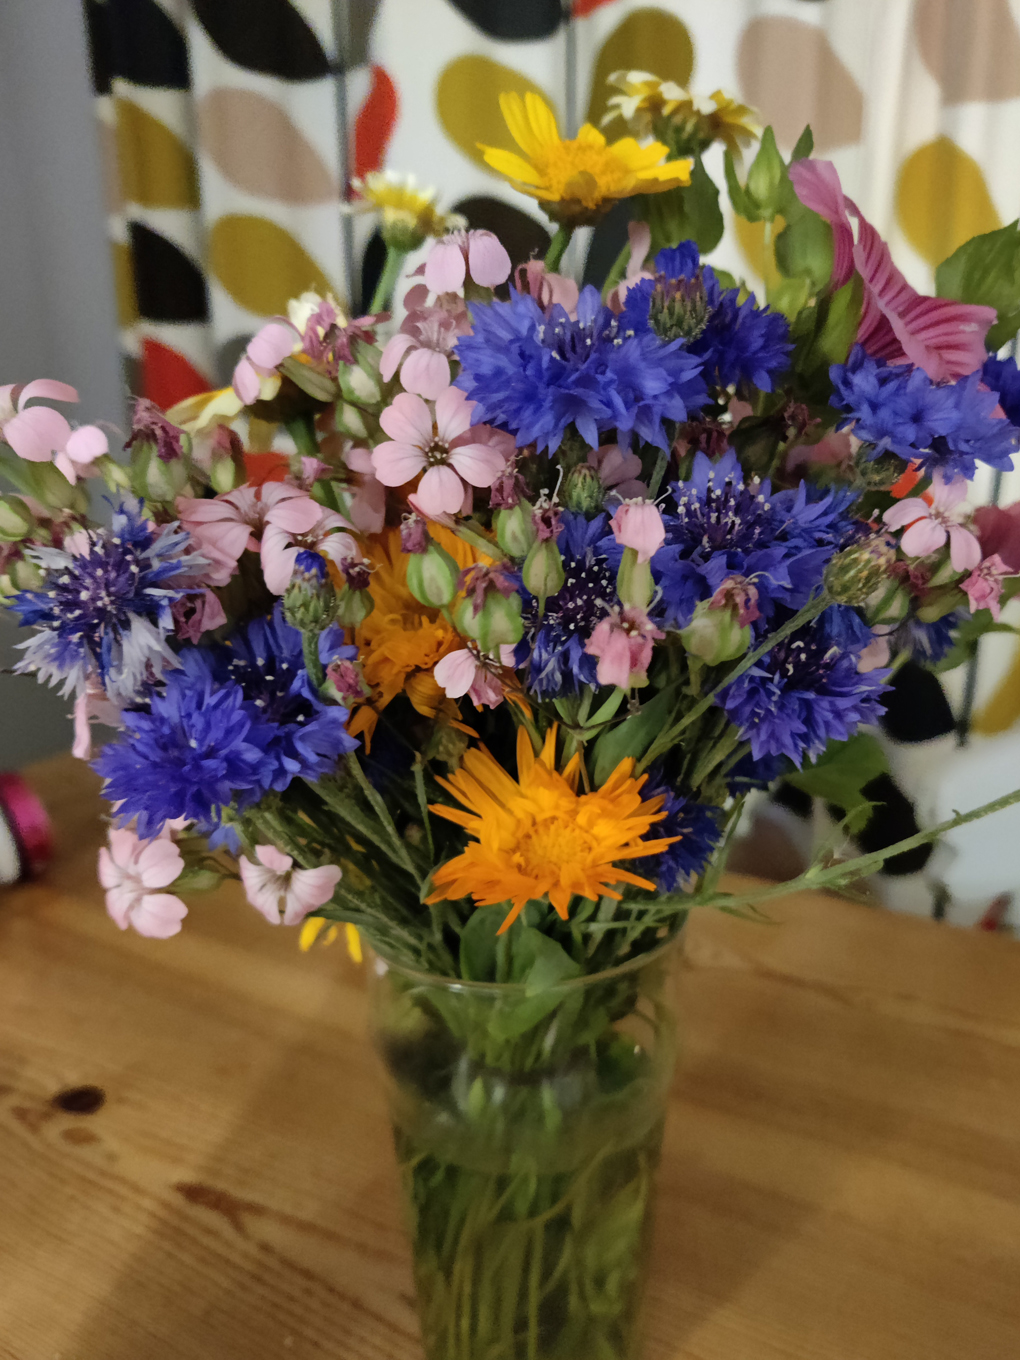 A colourful bunch of flowers in a vase, with particularly bright blue cornflowers